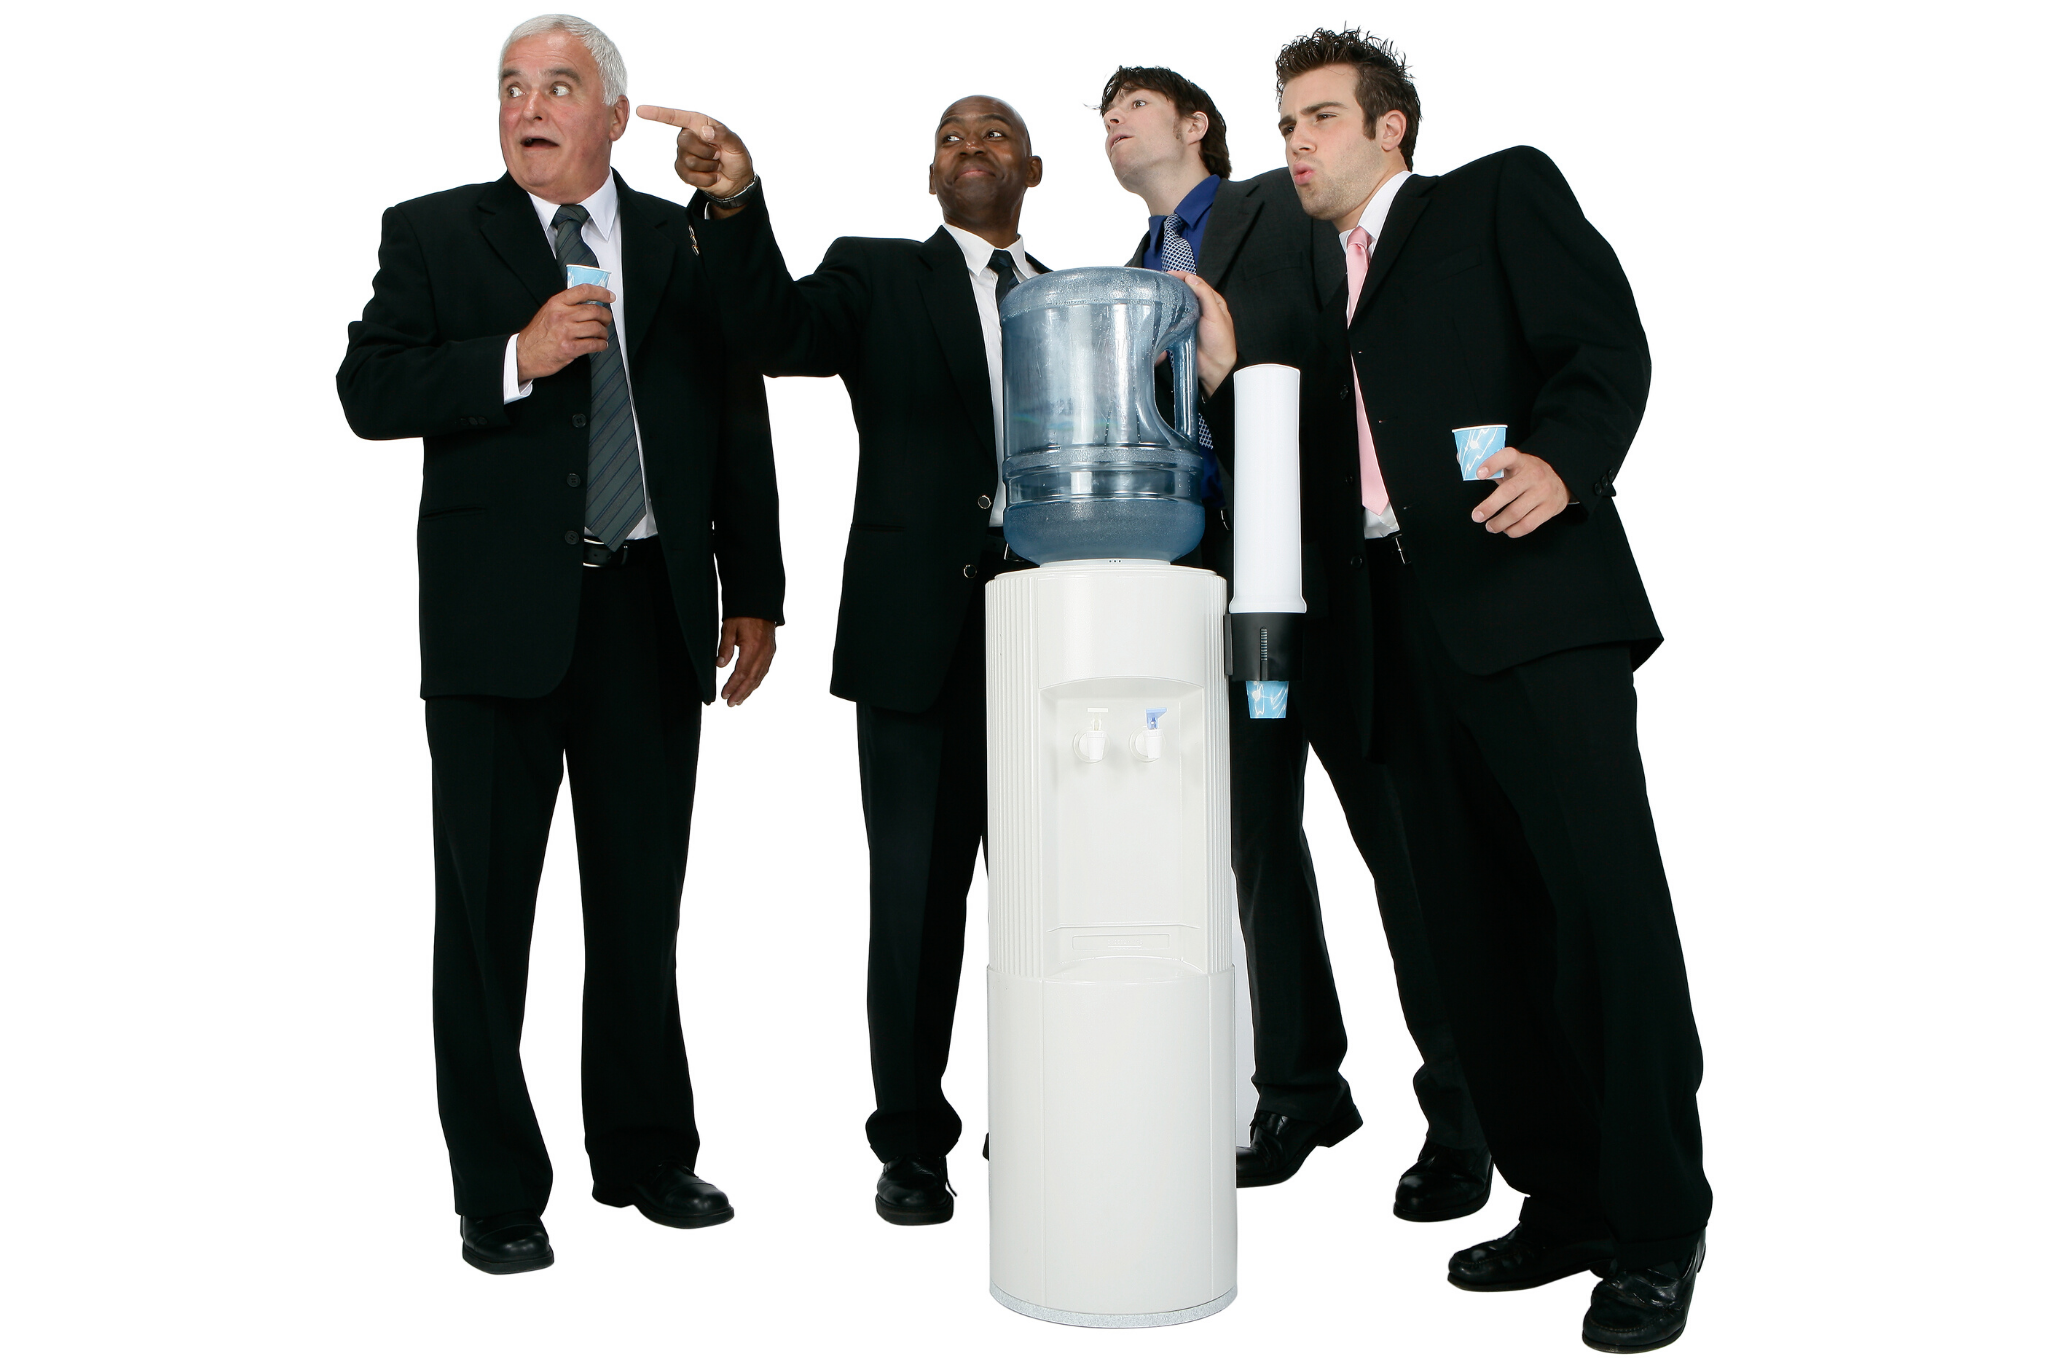 water cooler chat